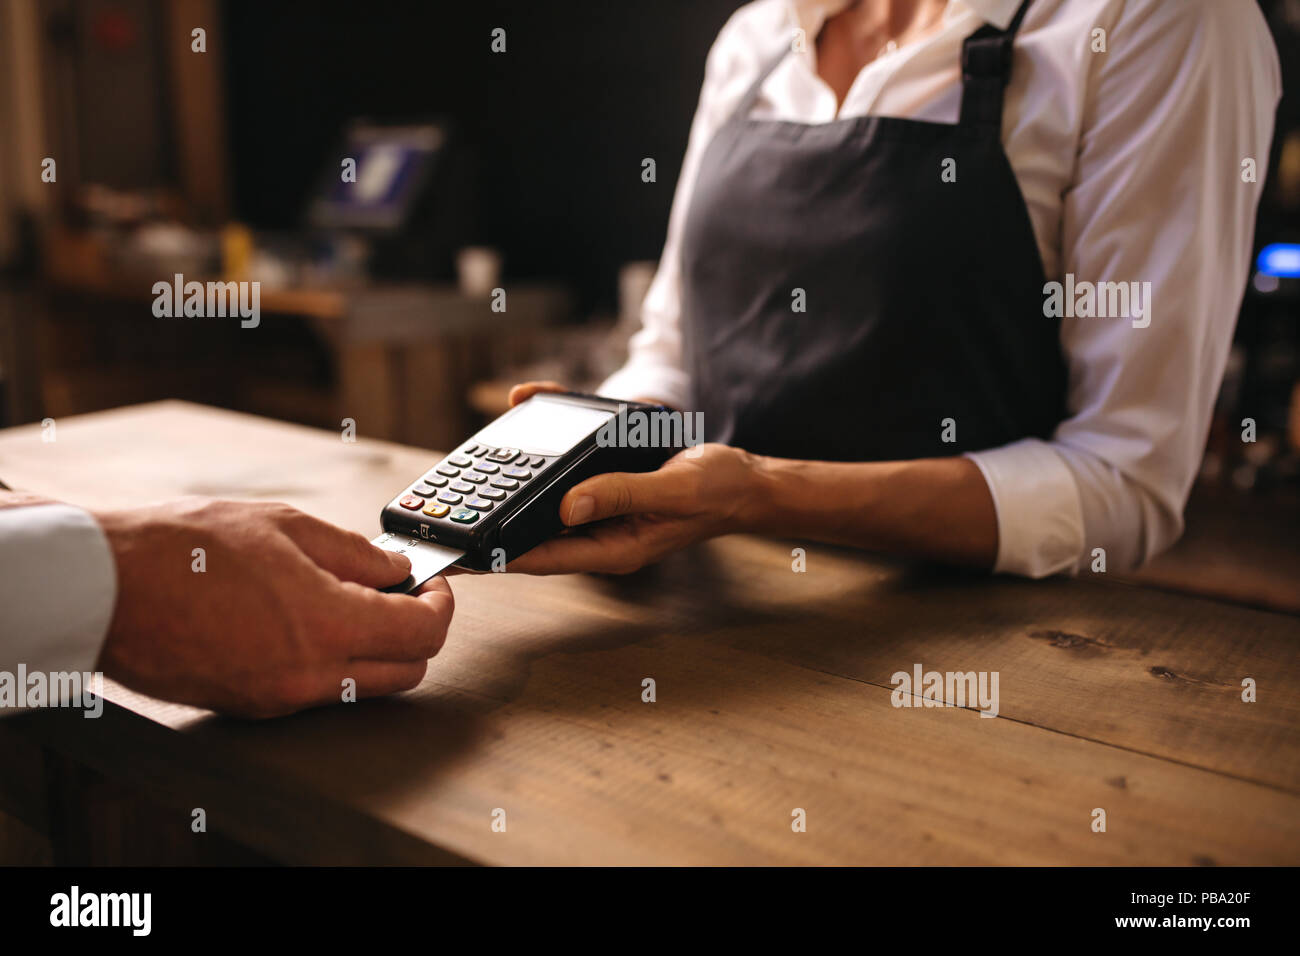 Female bartender holding a credit card reader machine with male customer inserting the card in machine for payment. Stock Photo